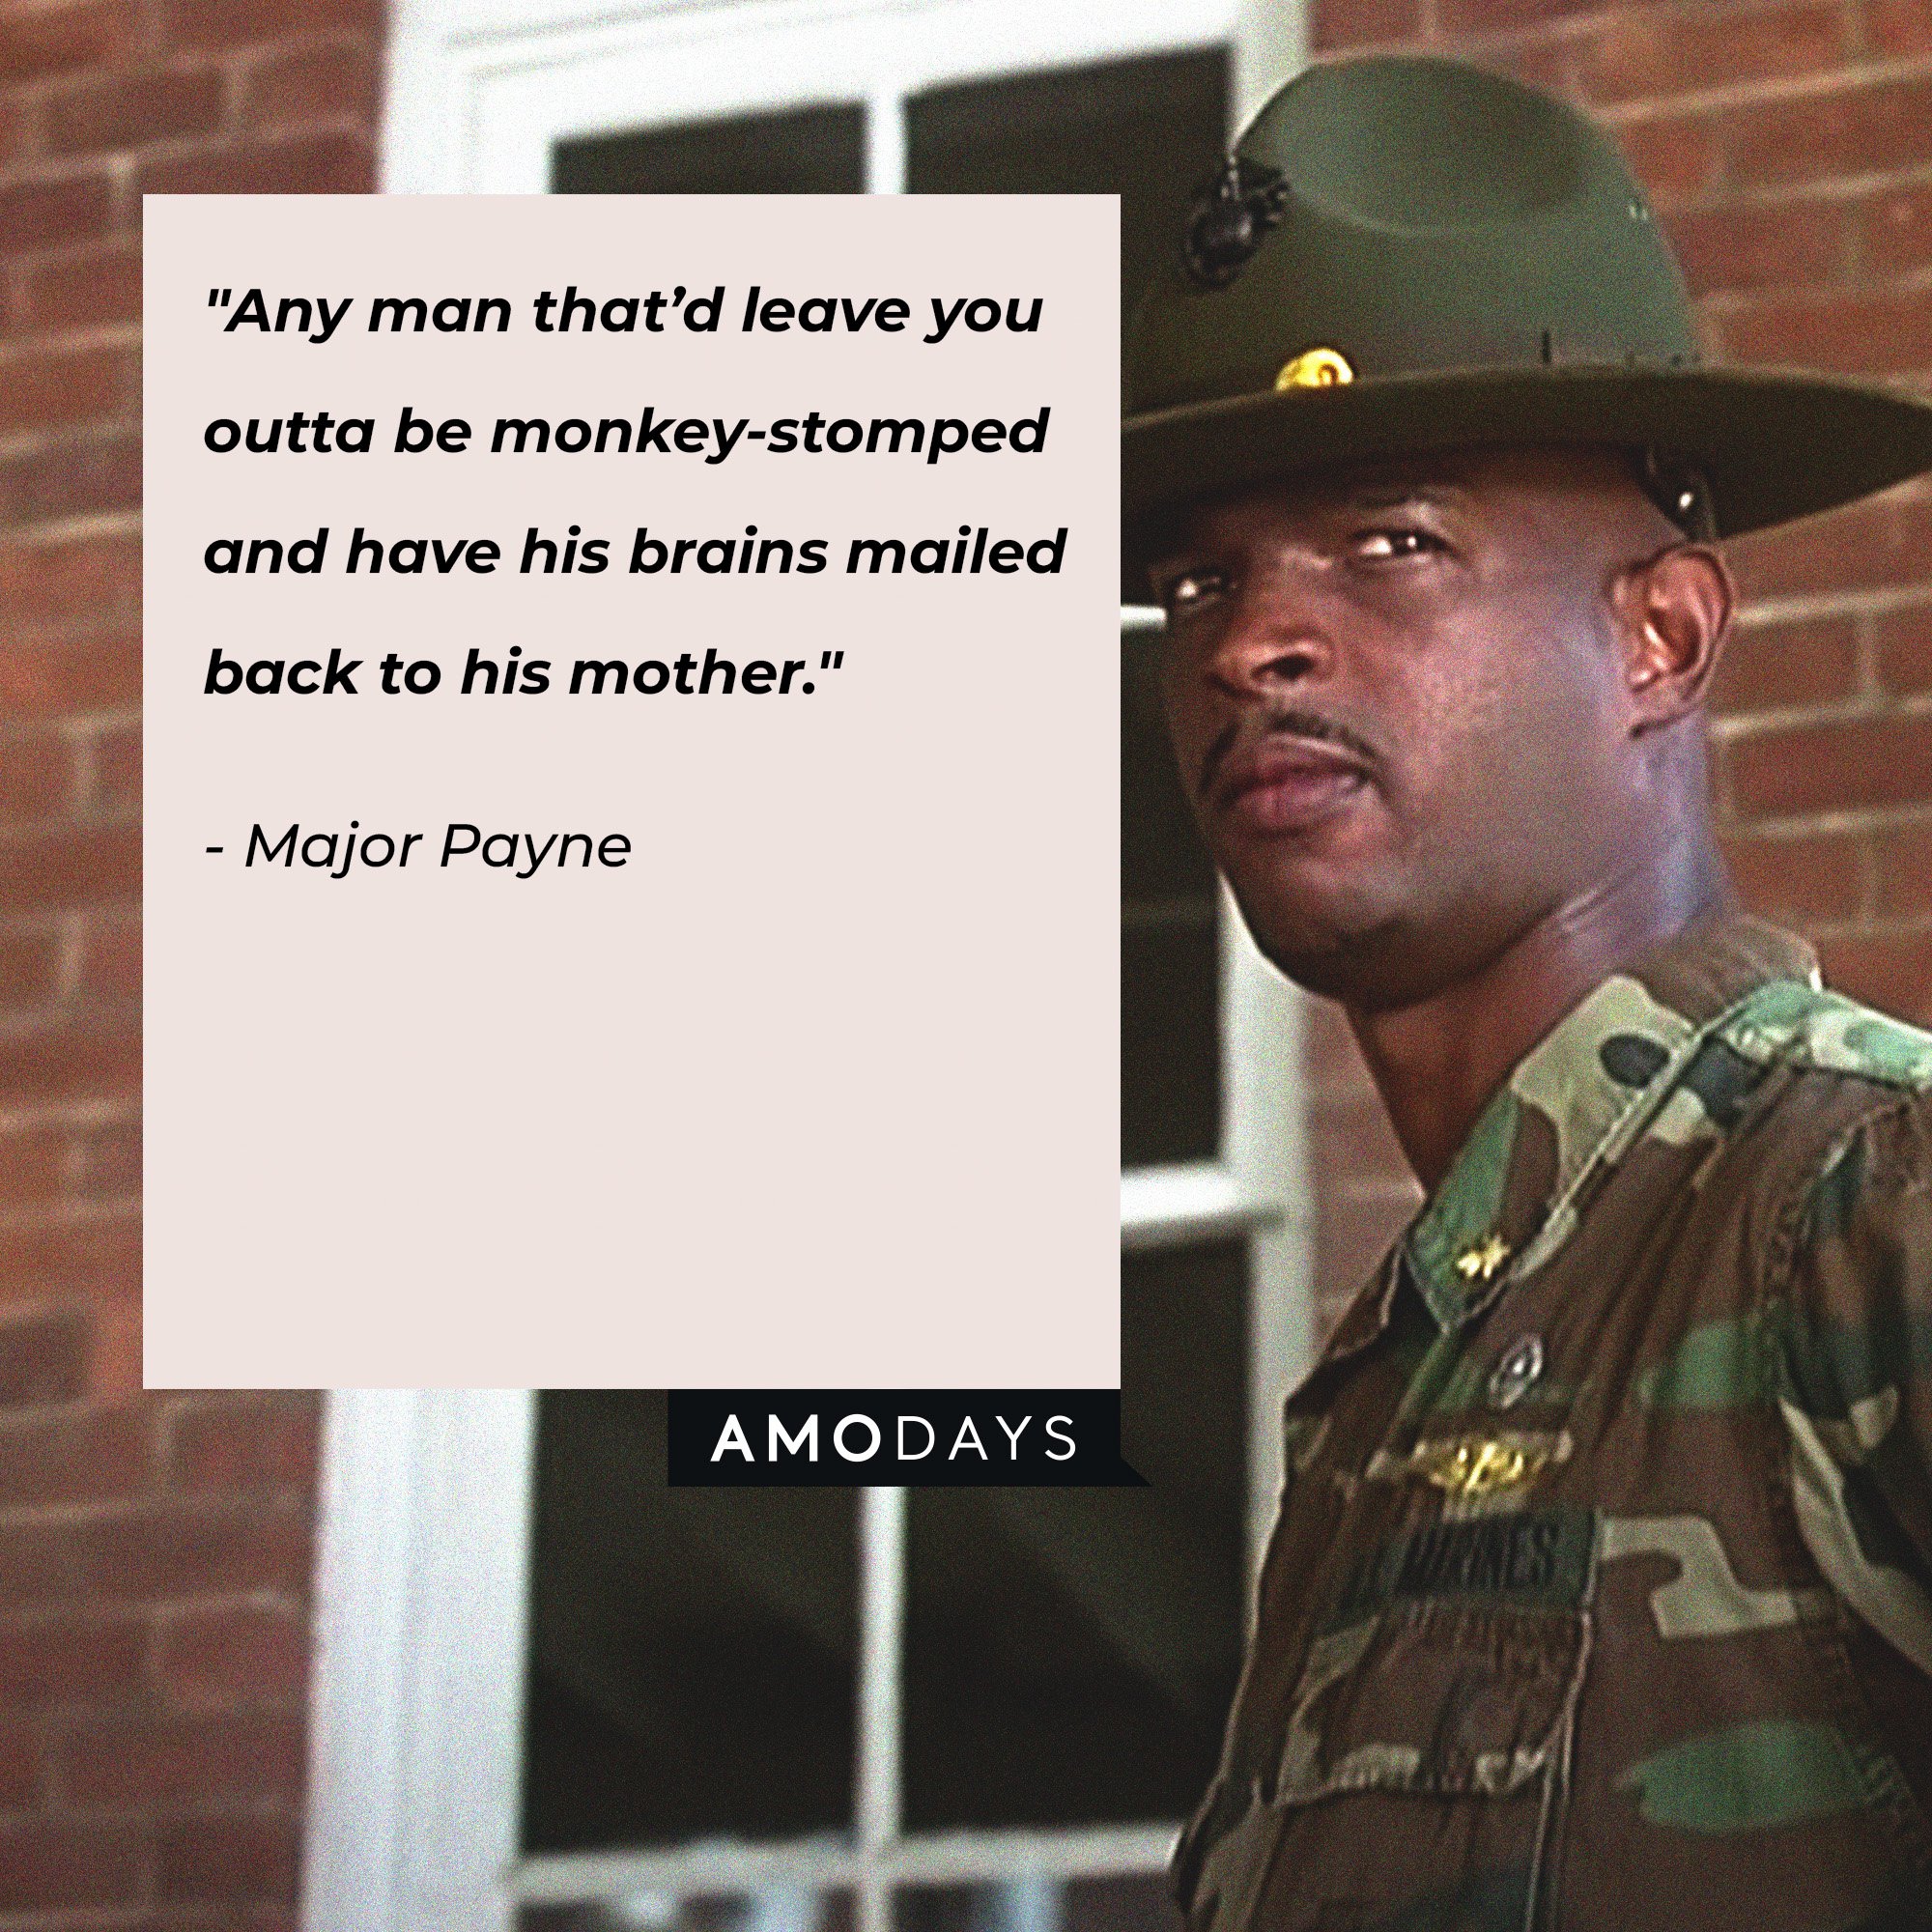 Major Payne's quote: "Any man that'd leave you outta be monkey-stomped and have his brains mailed back to his mother."  | Source: Amodays